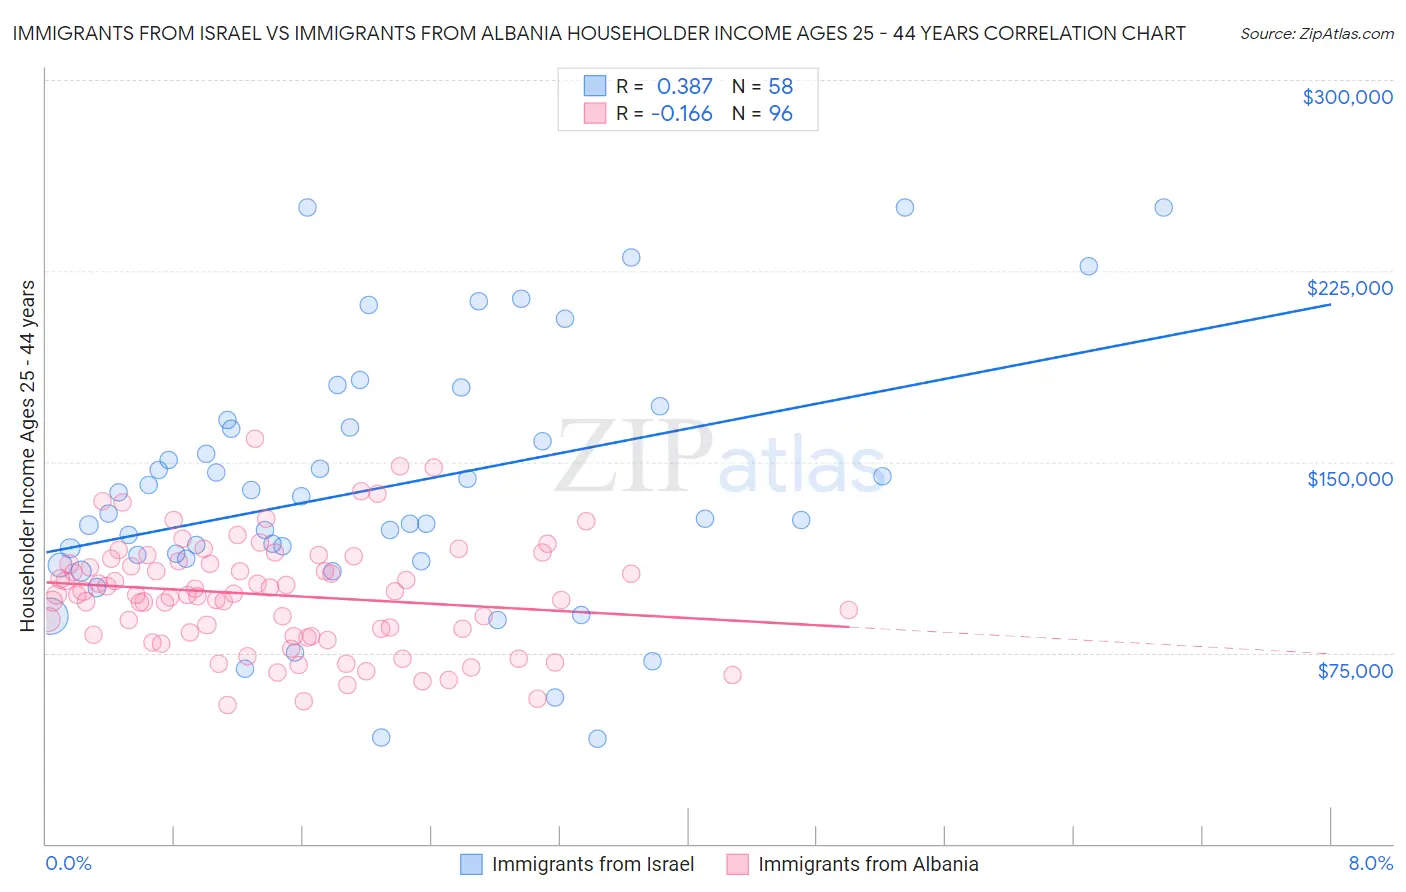 Immigrants from Israel vs Immigrants from Albania Householder Income Ages 25 - 44 years